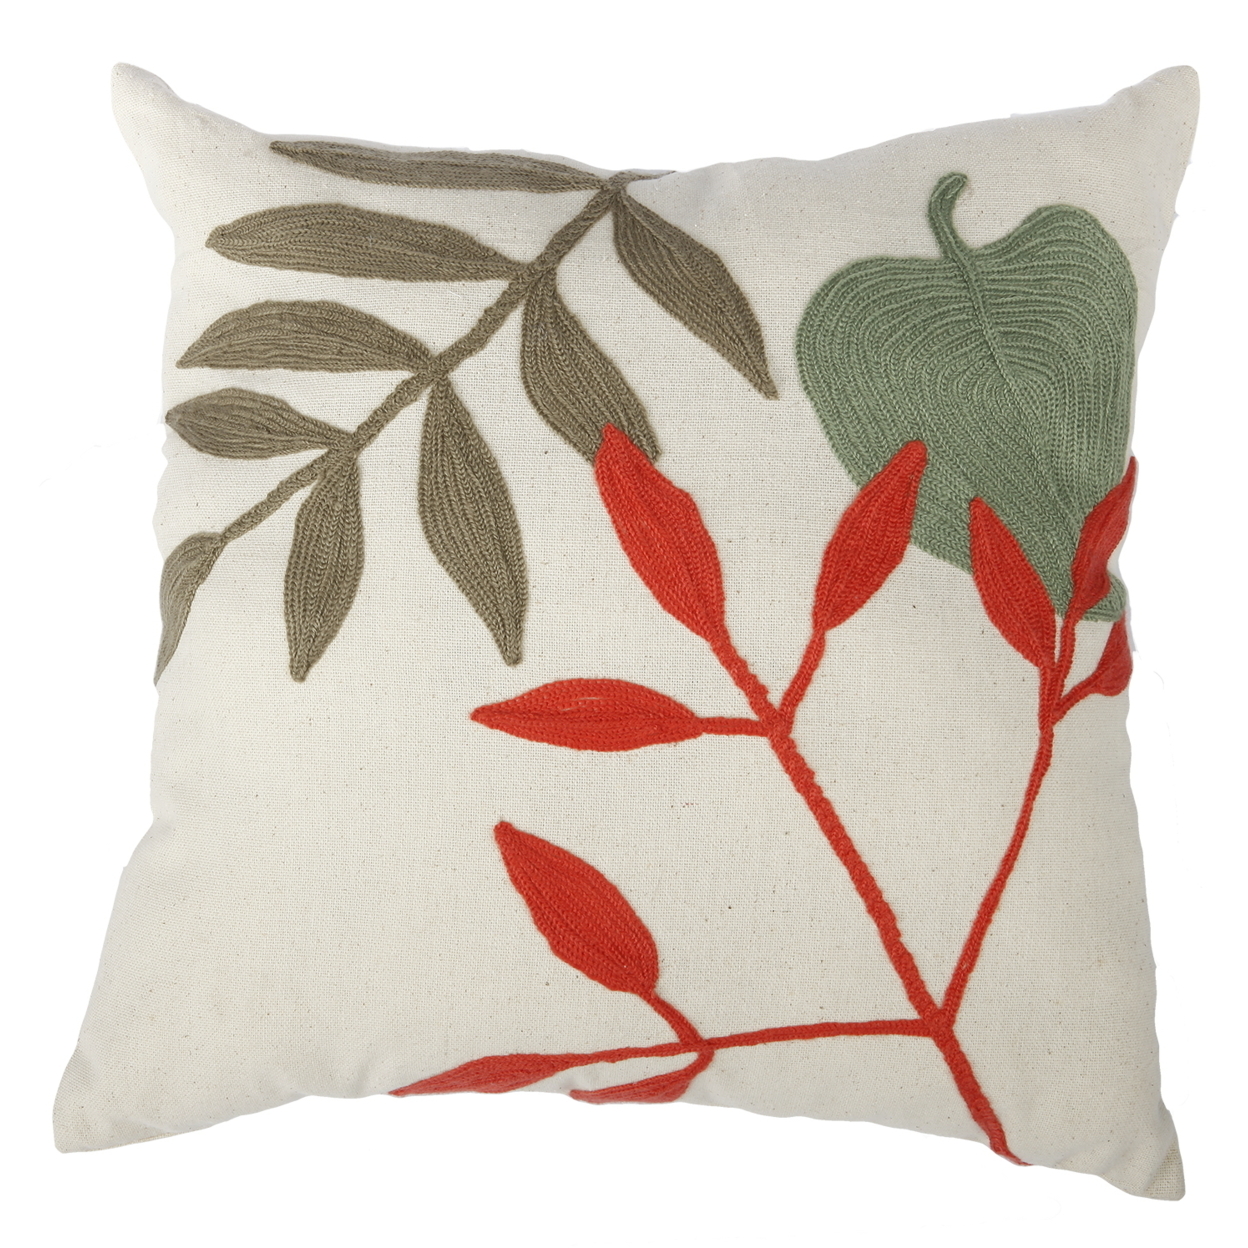 20 X 20 Inch Cotton Pillow With Leaves Embroidery, Set Of 2, Multicolor- Saltoro Sherpi